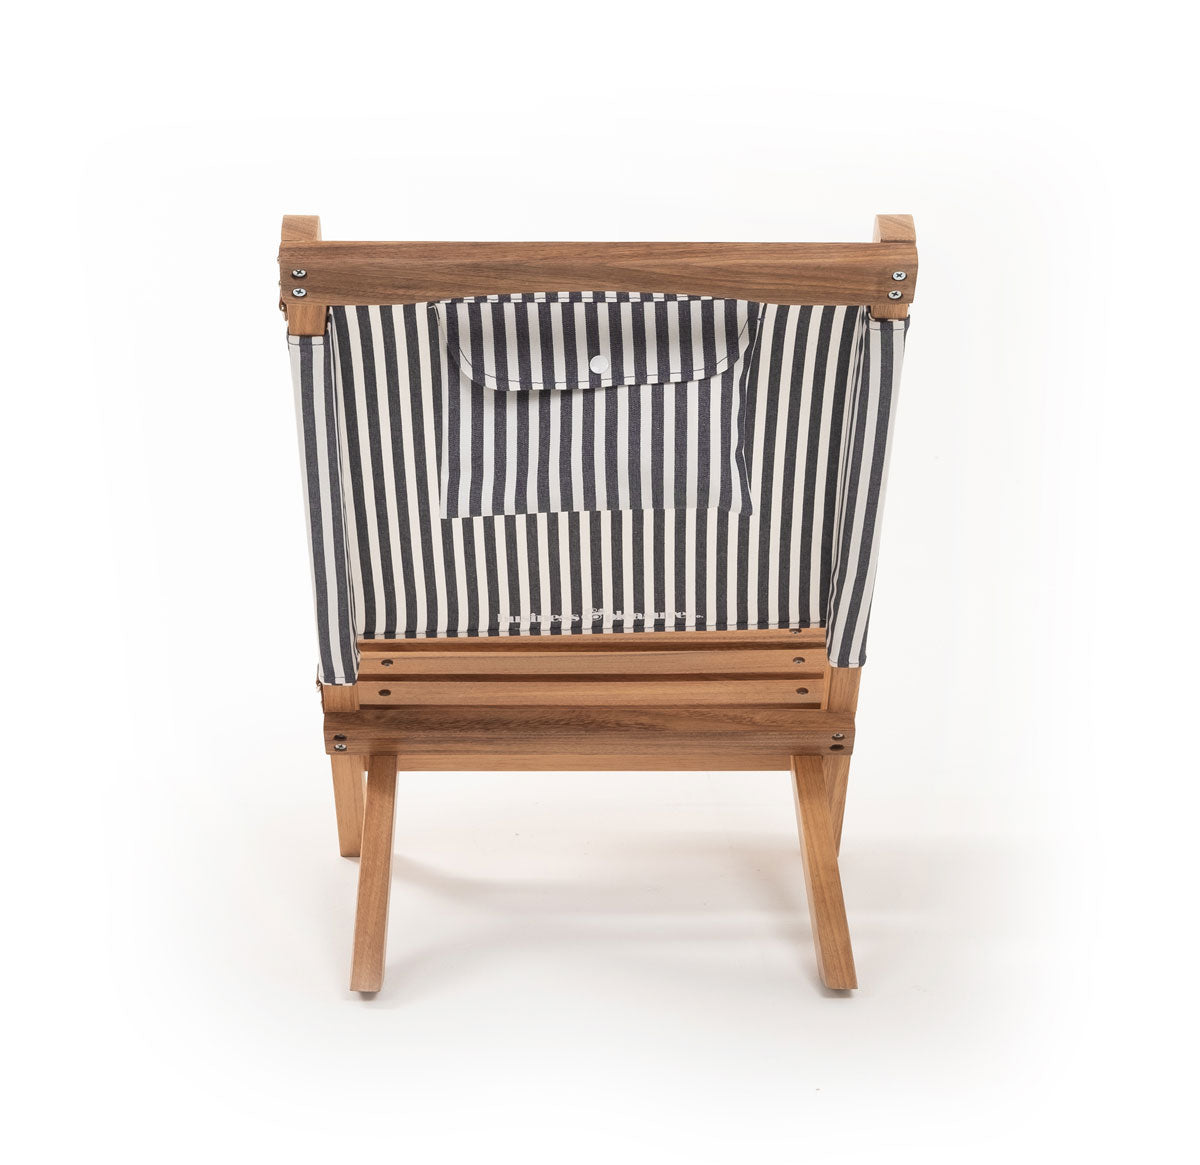 Navy and White Stripe Canvas Small Portable Outdoor Beach Chair